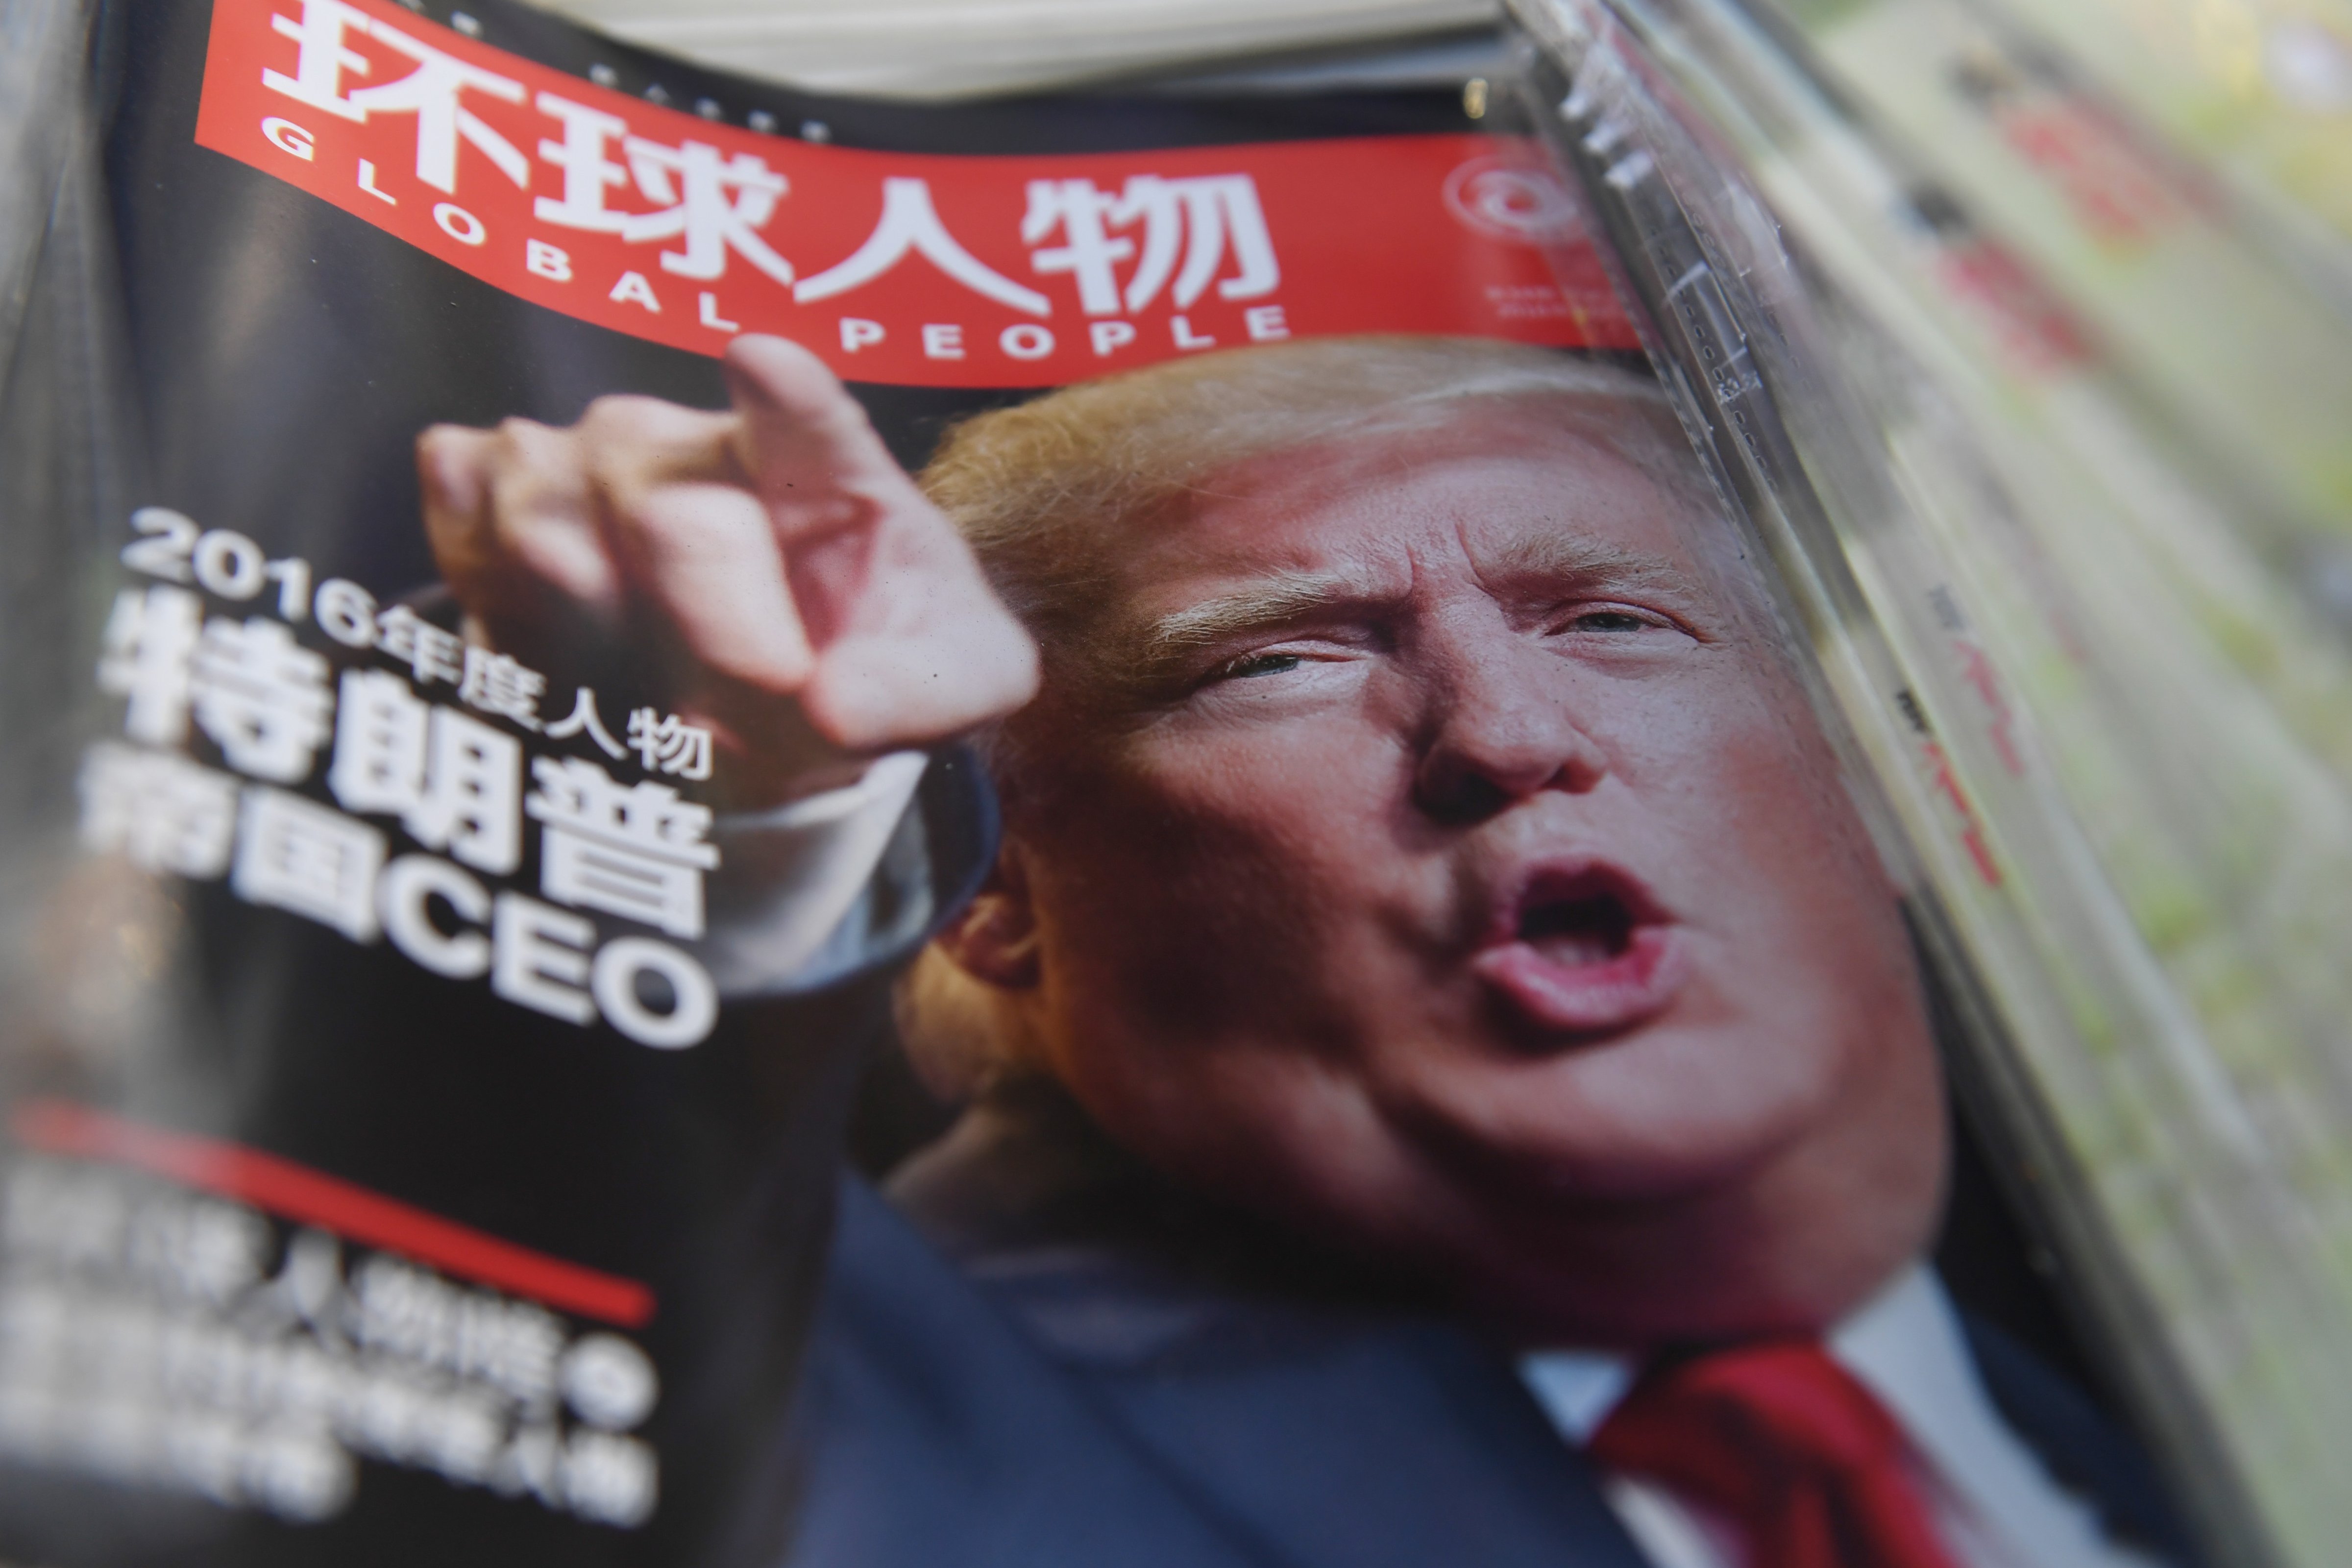 A Chinese magazine with a front-page story naming then U.S. President-elect Donald Trump as its Person of the Year is seen at a news stand in Beijing on Dec. 29, 2016 (Greg Baker—AFP/Getty Images)